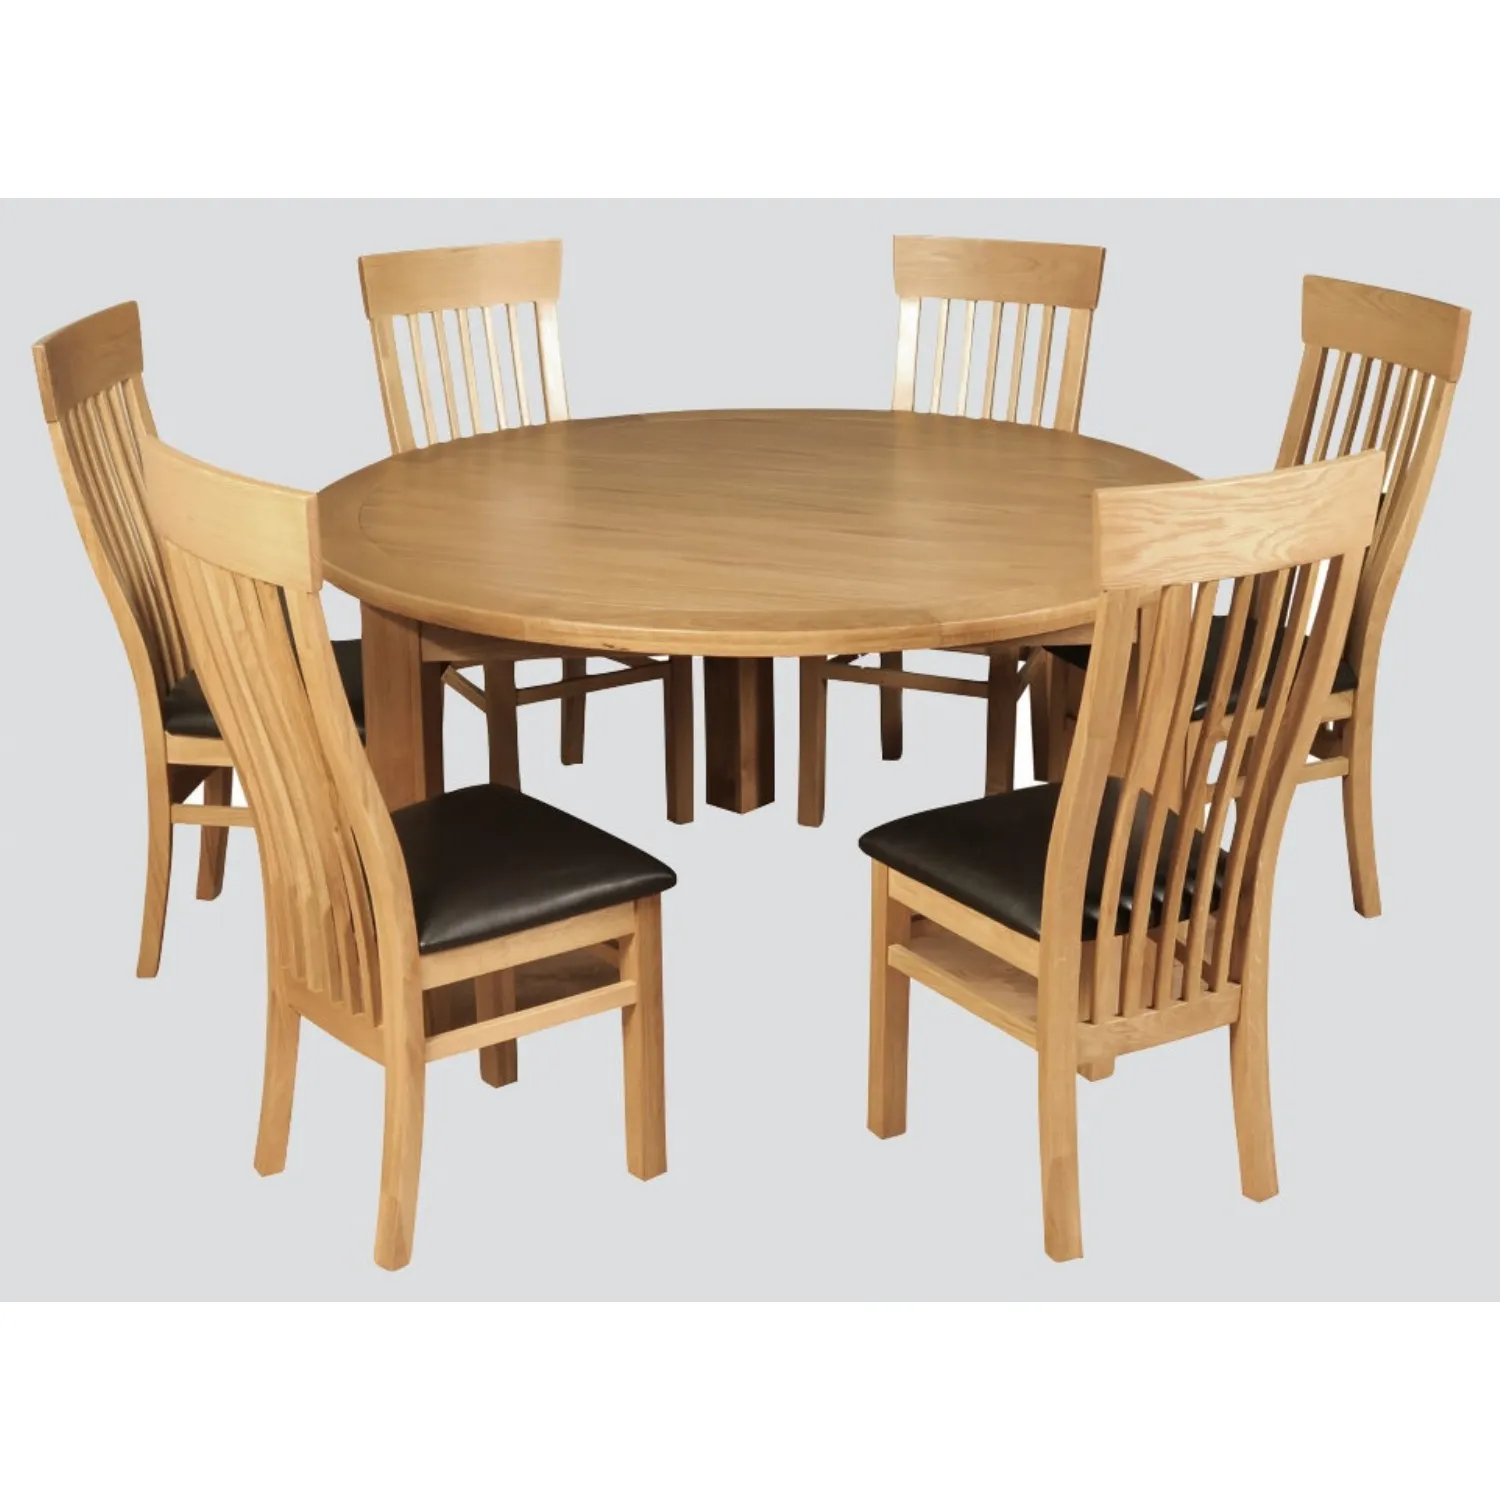 Solid Oak 150cm Round Dining Table and 6 Oak Dining Chairs